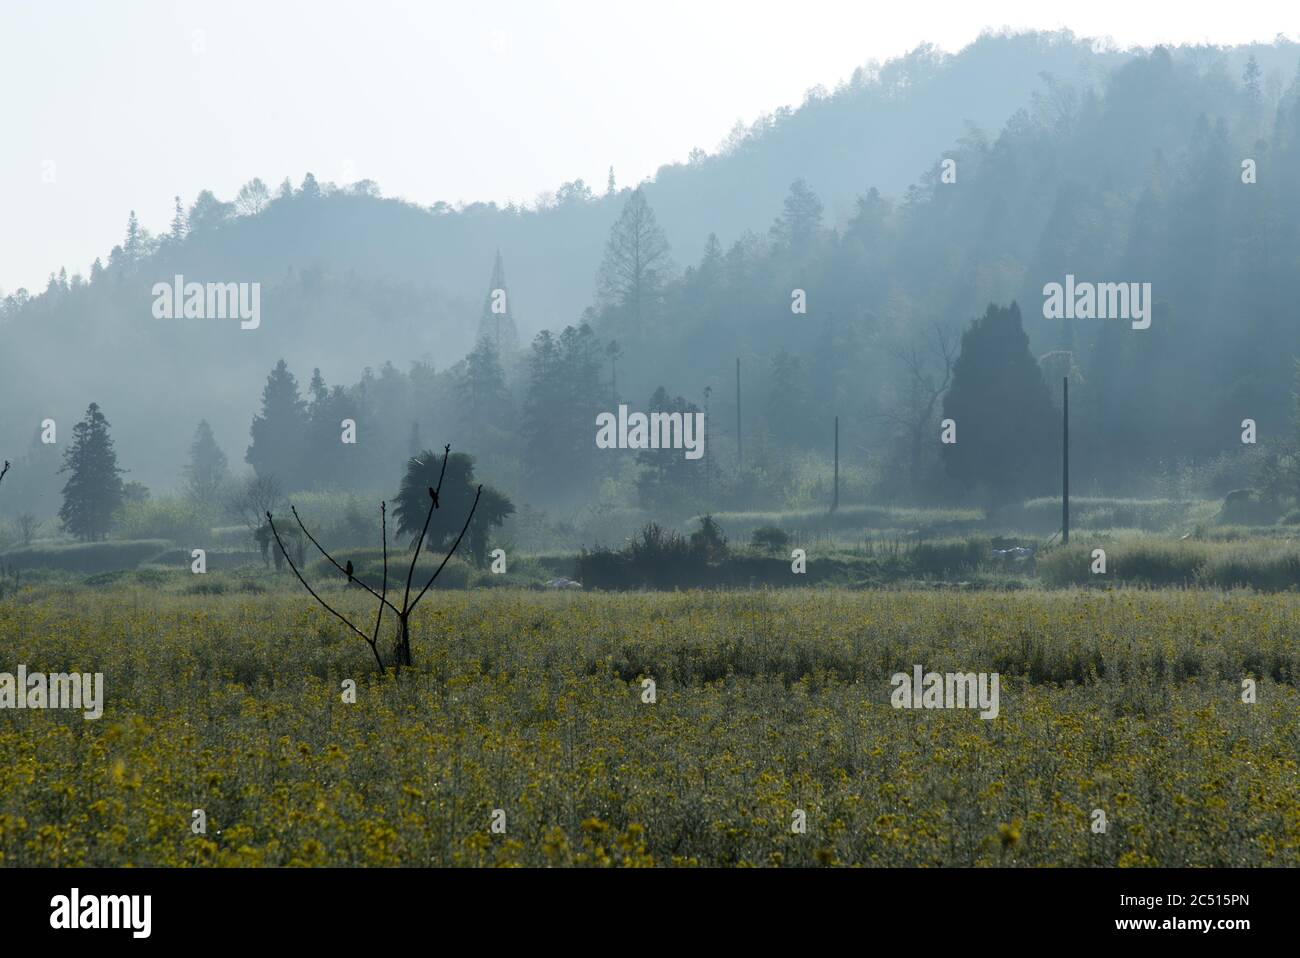 Birds sitting on tree branches in a field of flowers on foggy morning, Xidi, Anhui Province, China Stock Photo